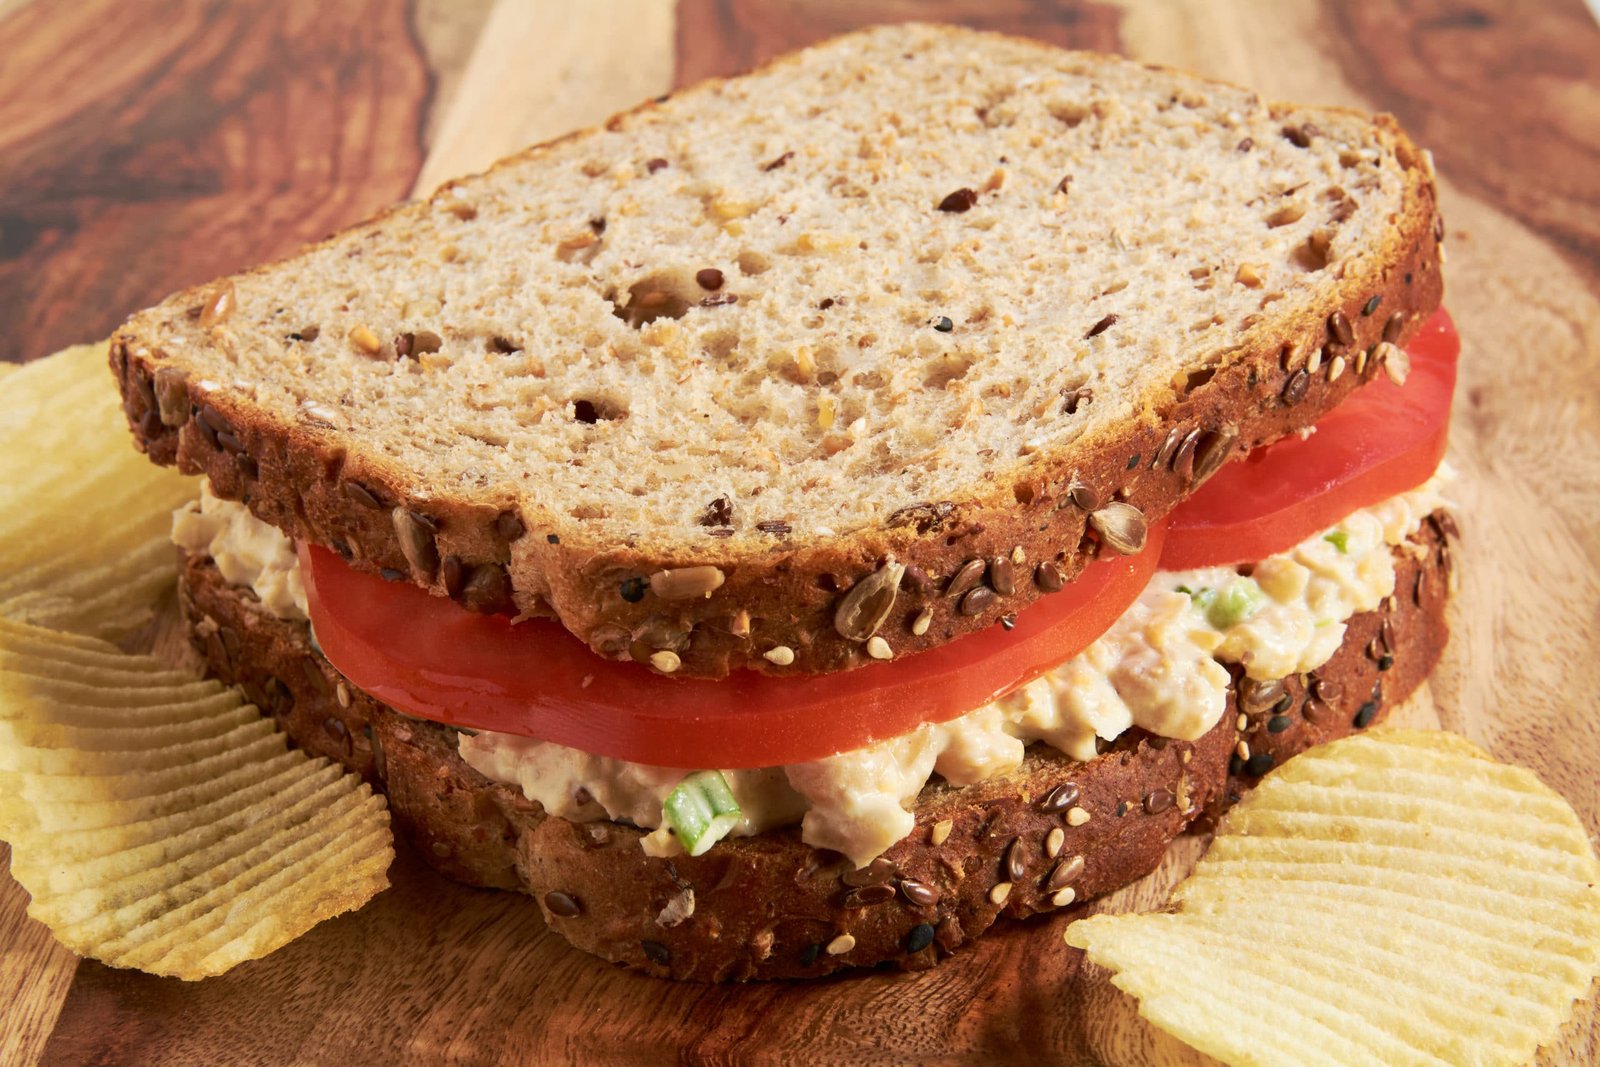 A sandwich made with whole grain bread, tomato slices and chickpea salad on a cutting board.